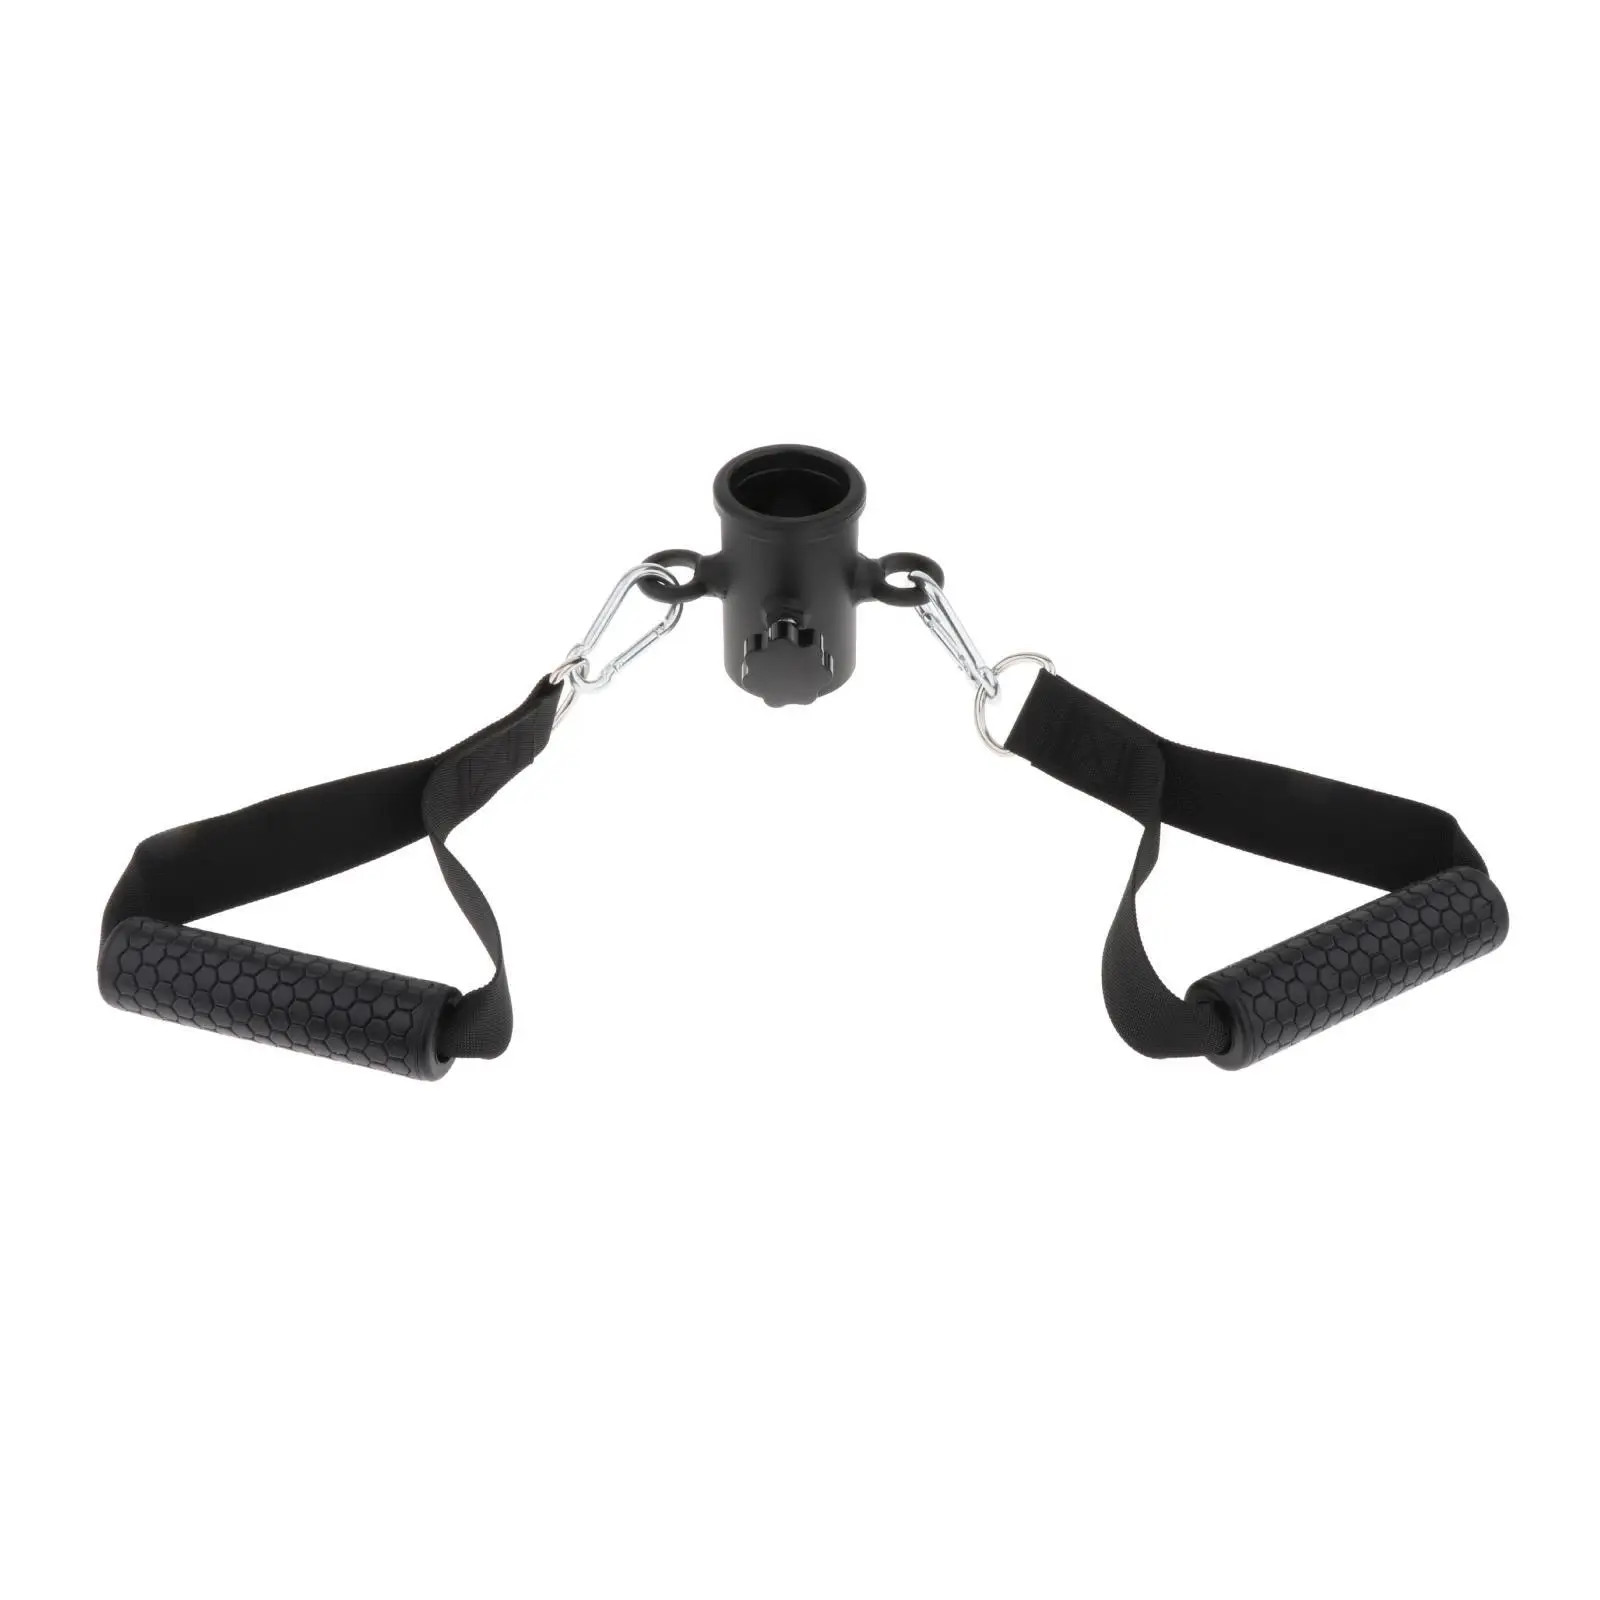 Landmine Double Handle Straps Handle Landmine Attachment Grips for Workout Exercise Home Gym Back Core Strength Training Presses